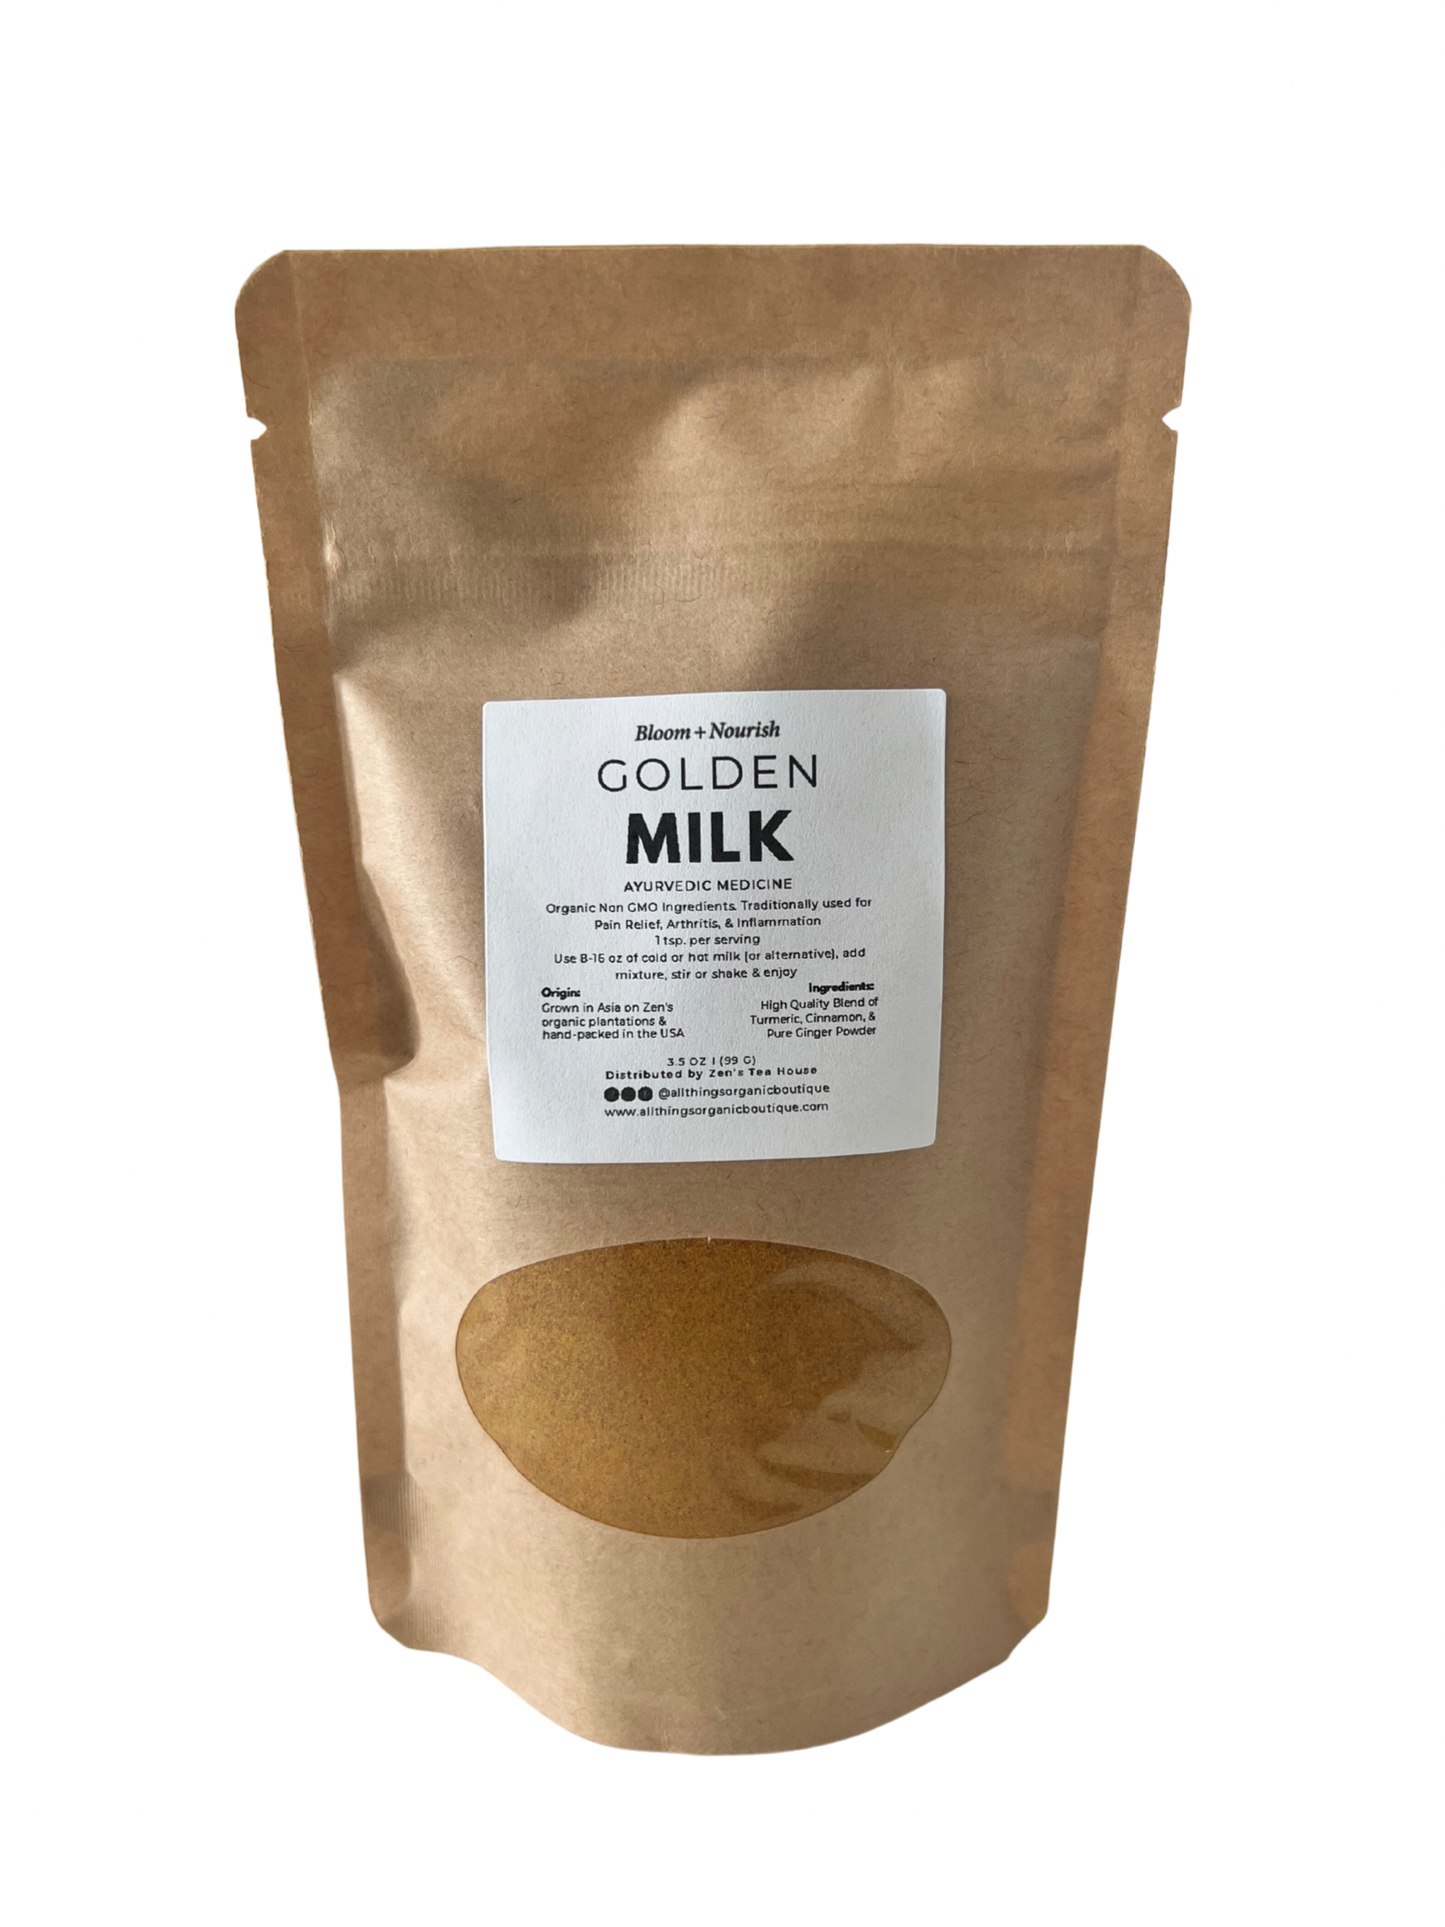 Golden Milk is a mix of Turmeric, Ginger, and Vietnamese Cinnamon powder and is 100% Organic